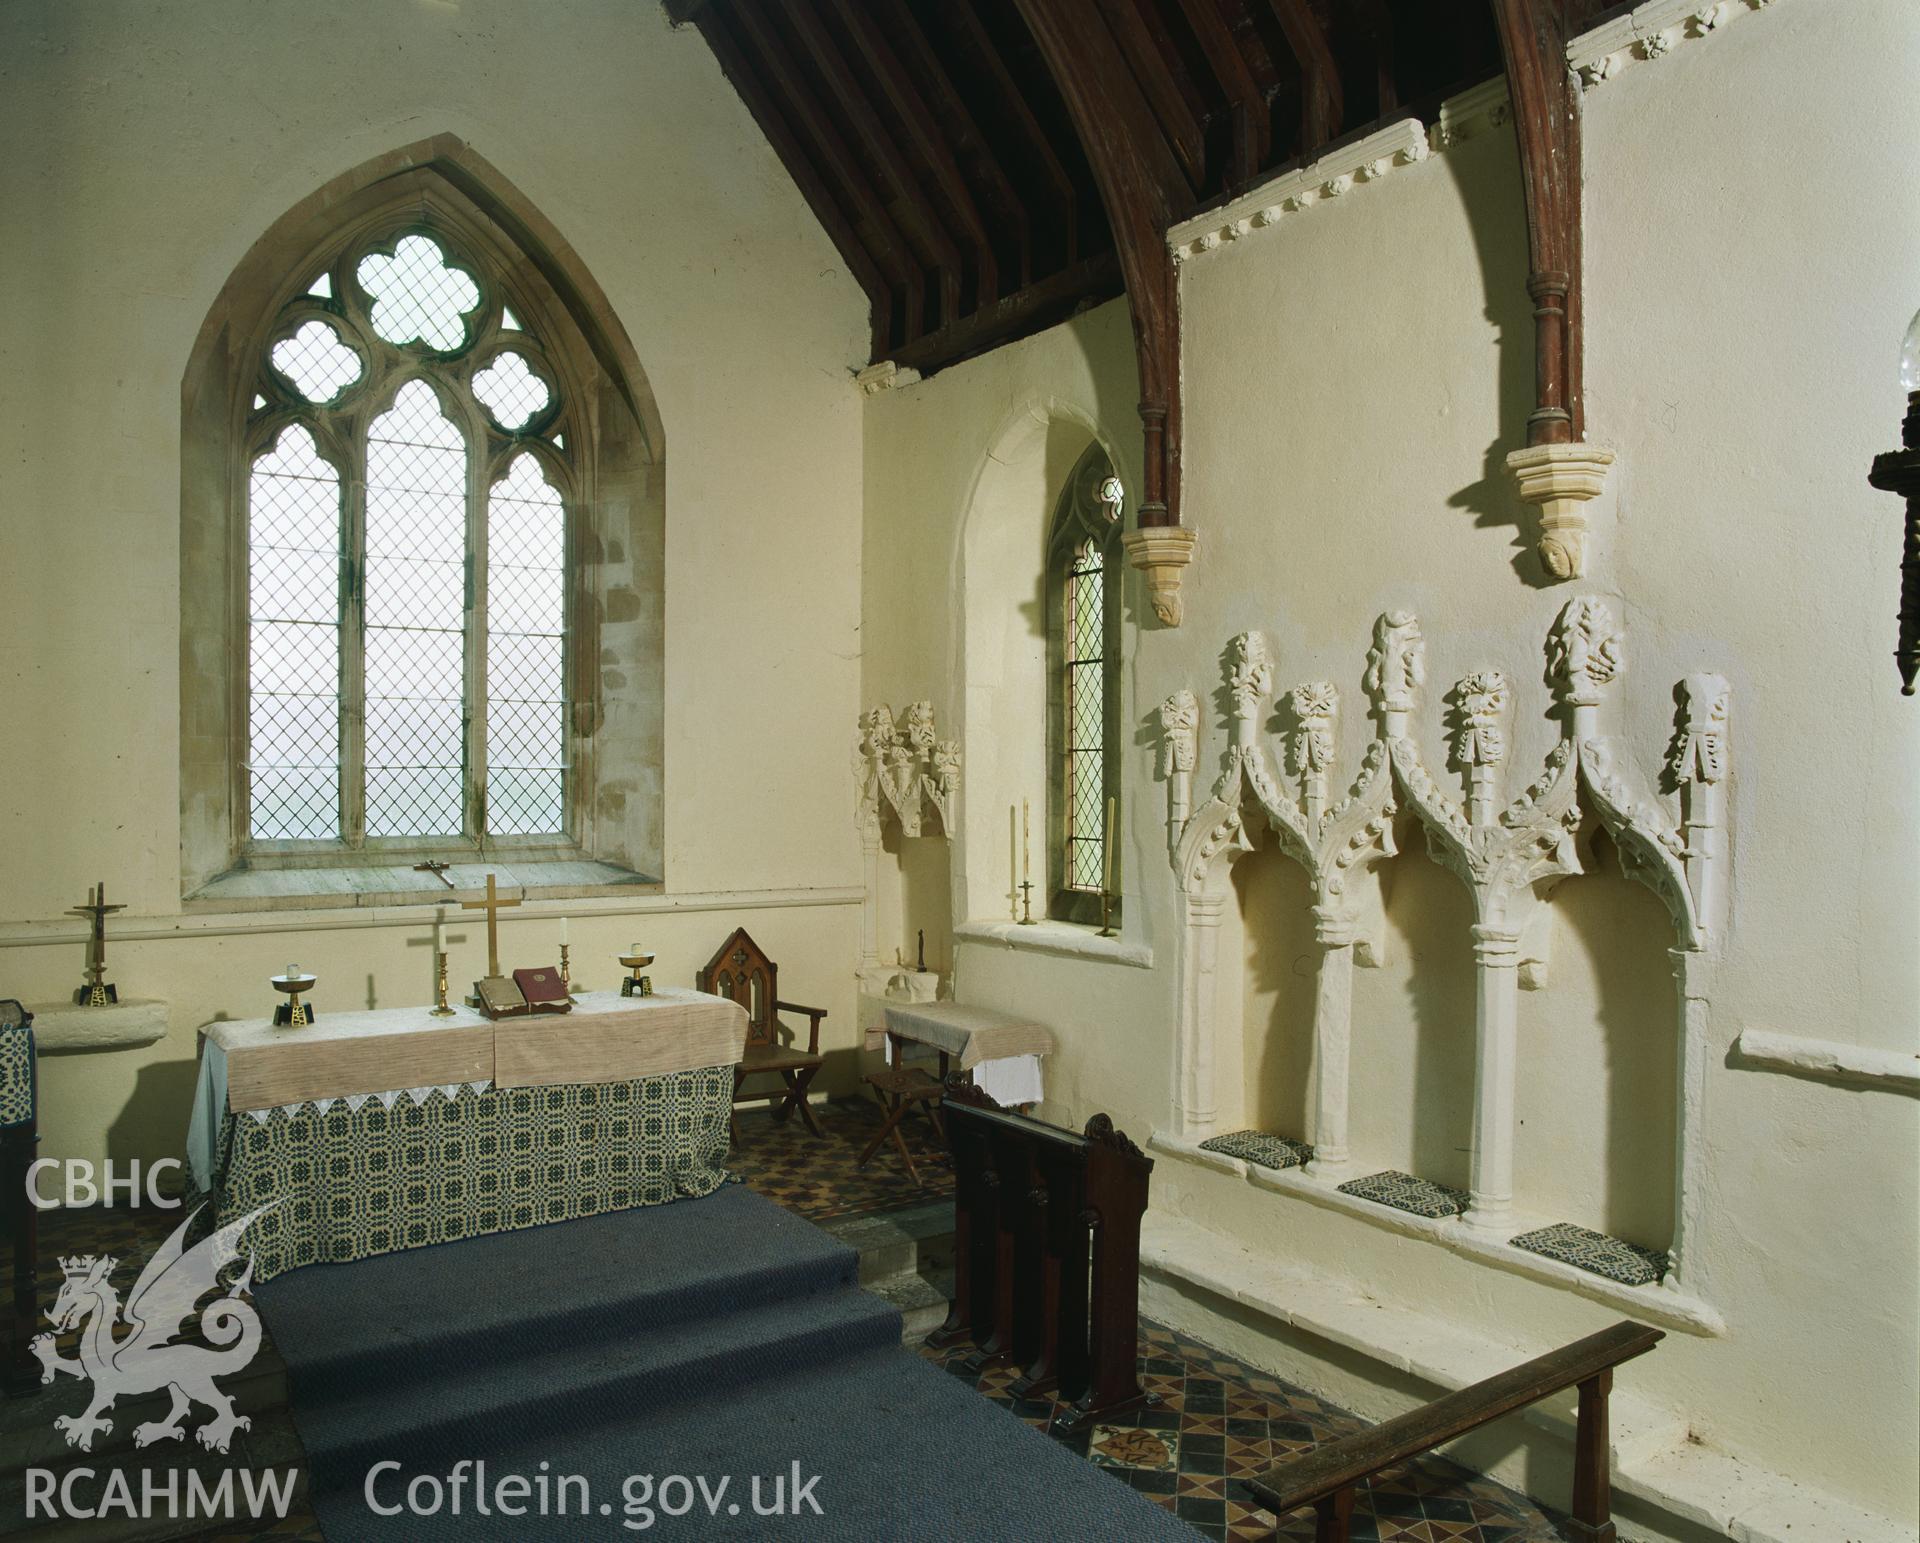 RCAHMW colour transparency showing interior view of Hodgeston Church, taken by Iain Wright, 2003